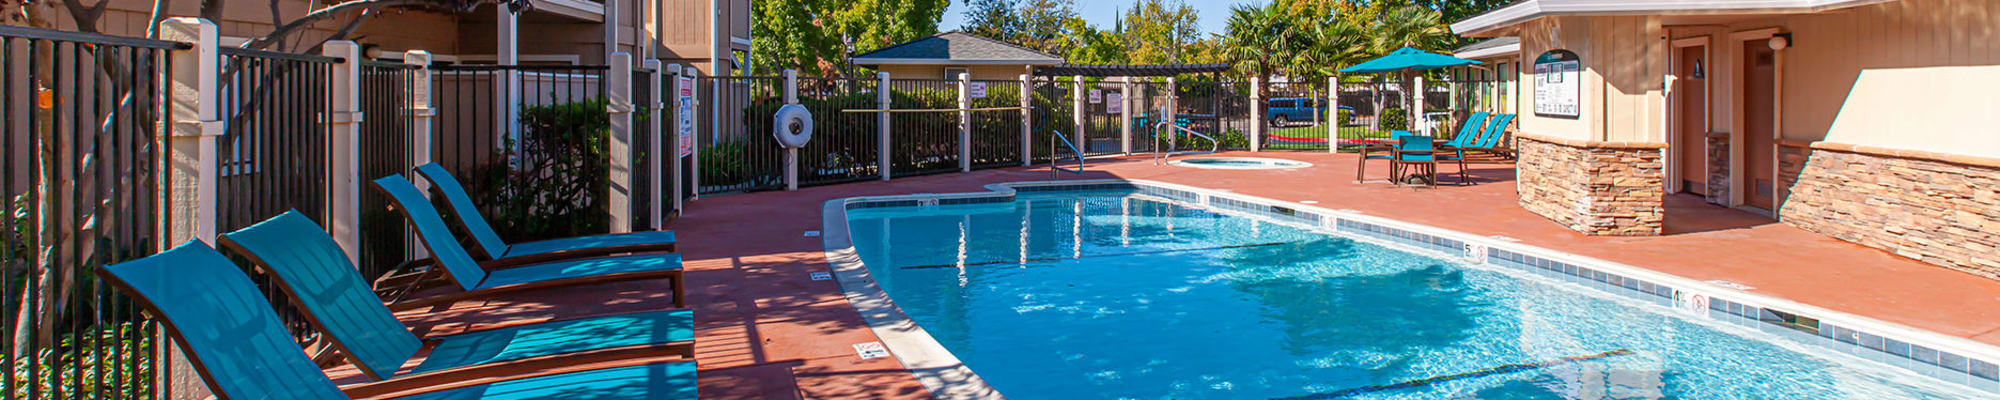 View a virtual tour of Sommerset Apartments in Vacaville, California